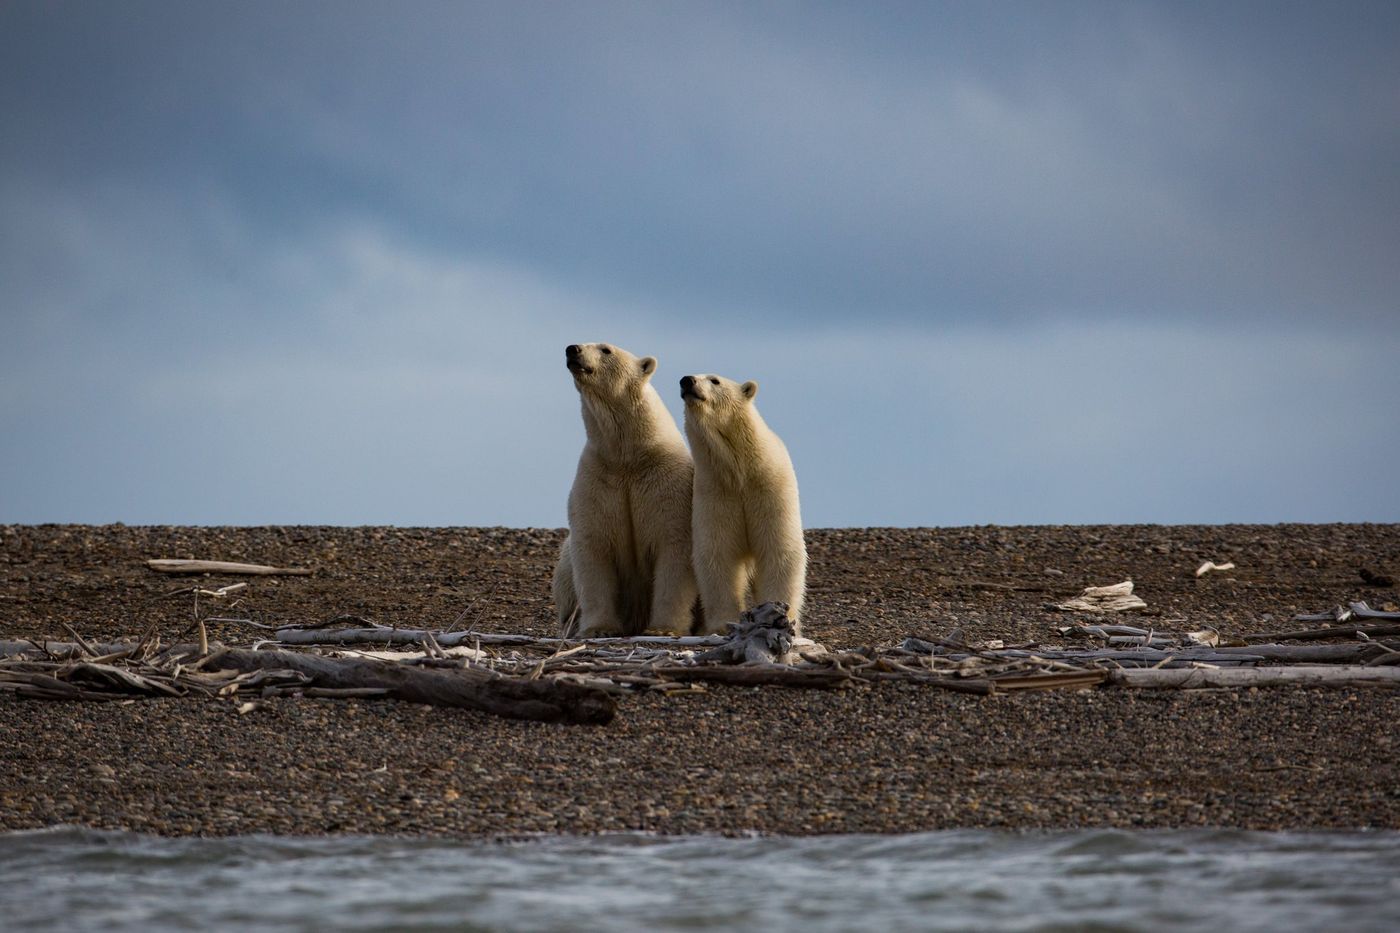 ANWR is home to the most polar bears in Alaska. Photo: The NY Times